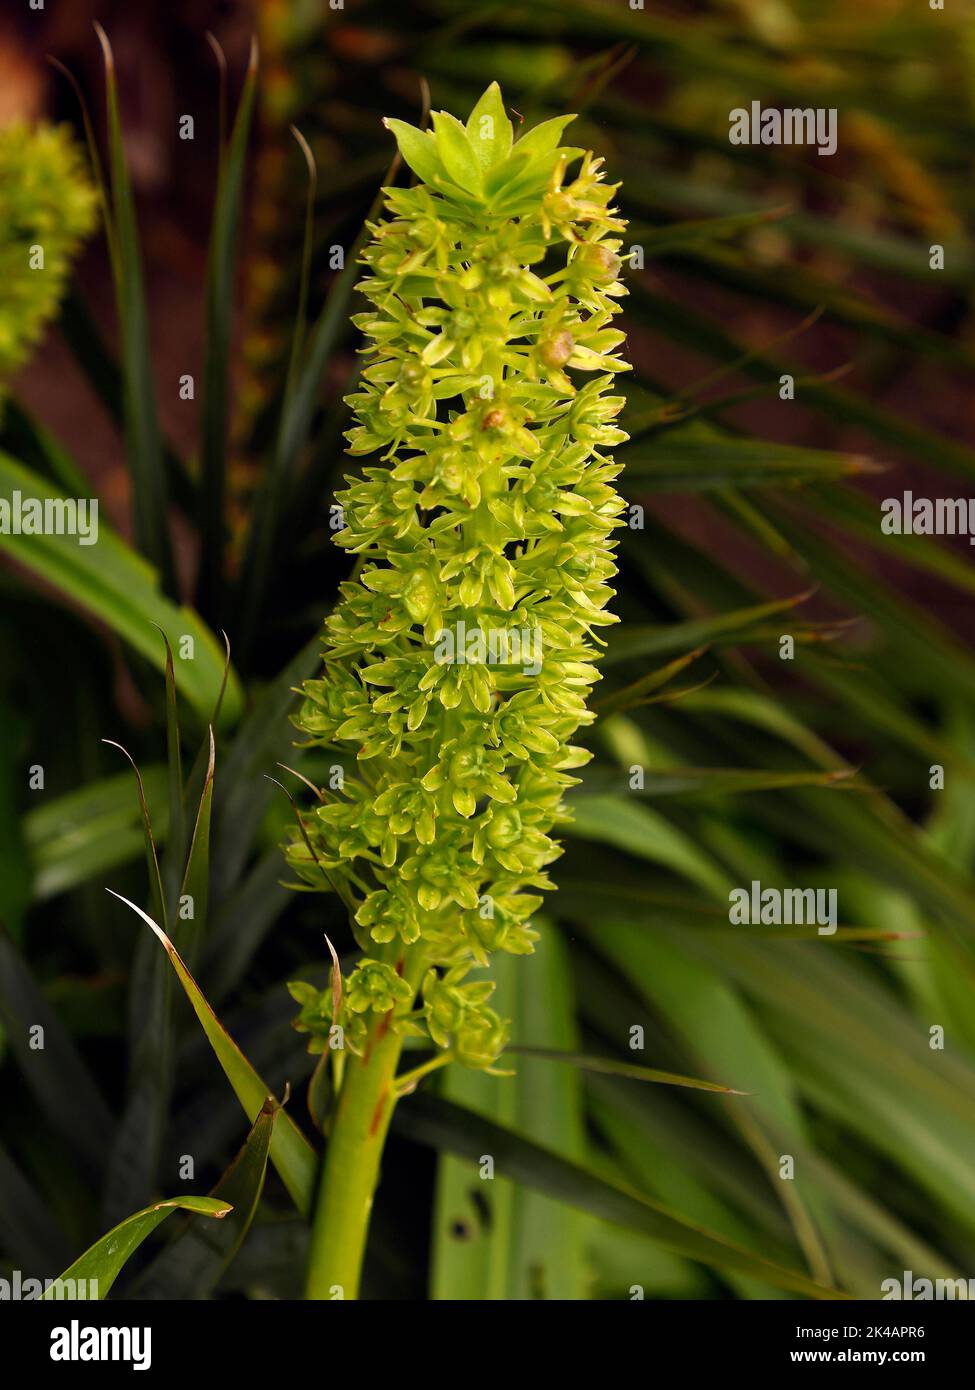 Close up of the seedhead of the bulbous garden plant Eucomis comosa Johannesburg seen in late summer and autumn. Stock Photo